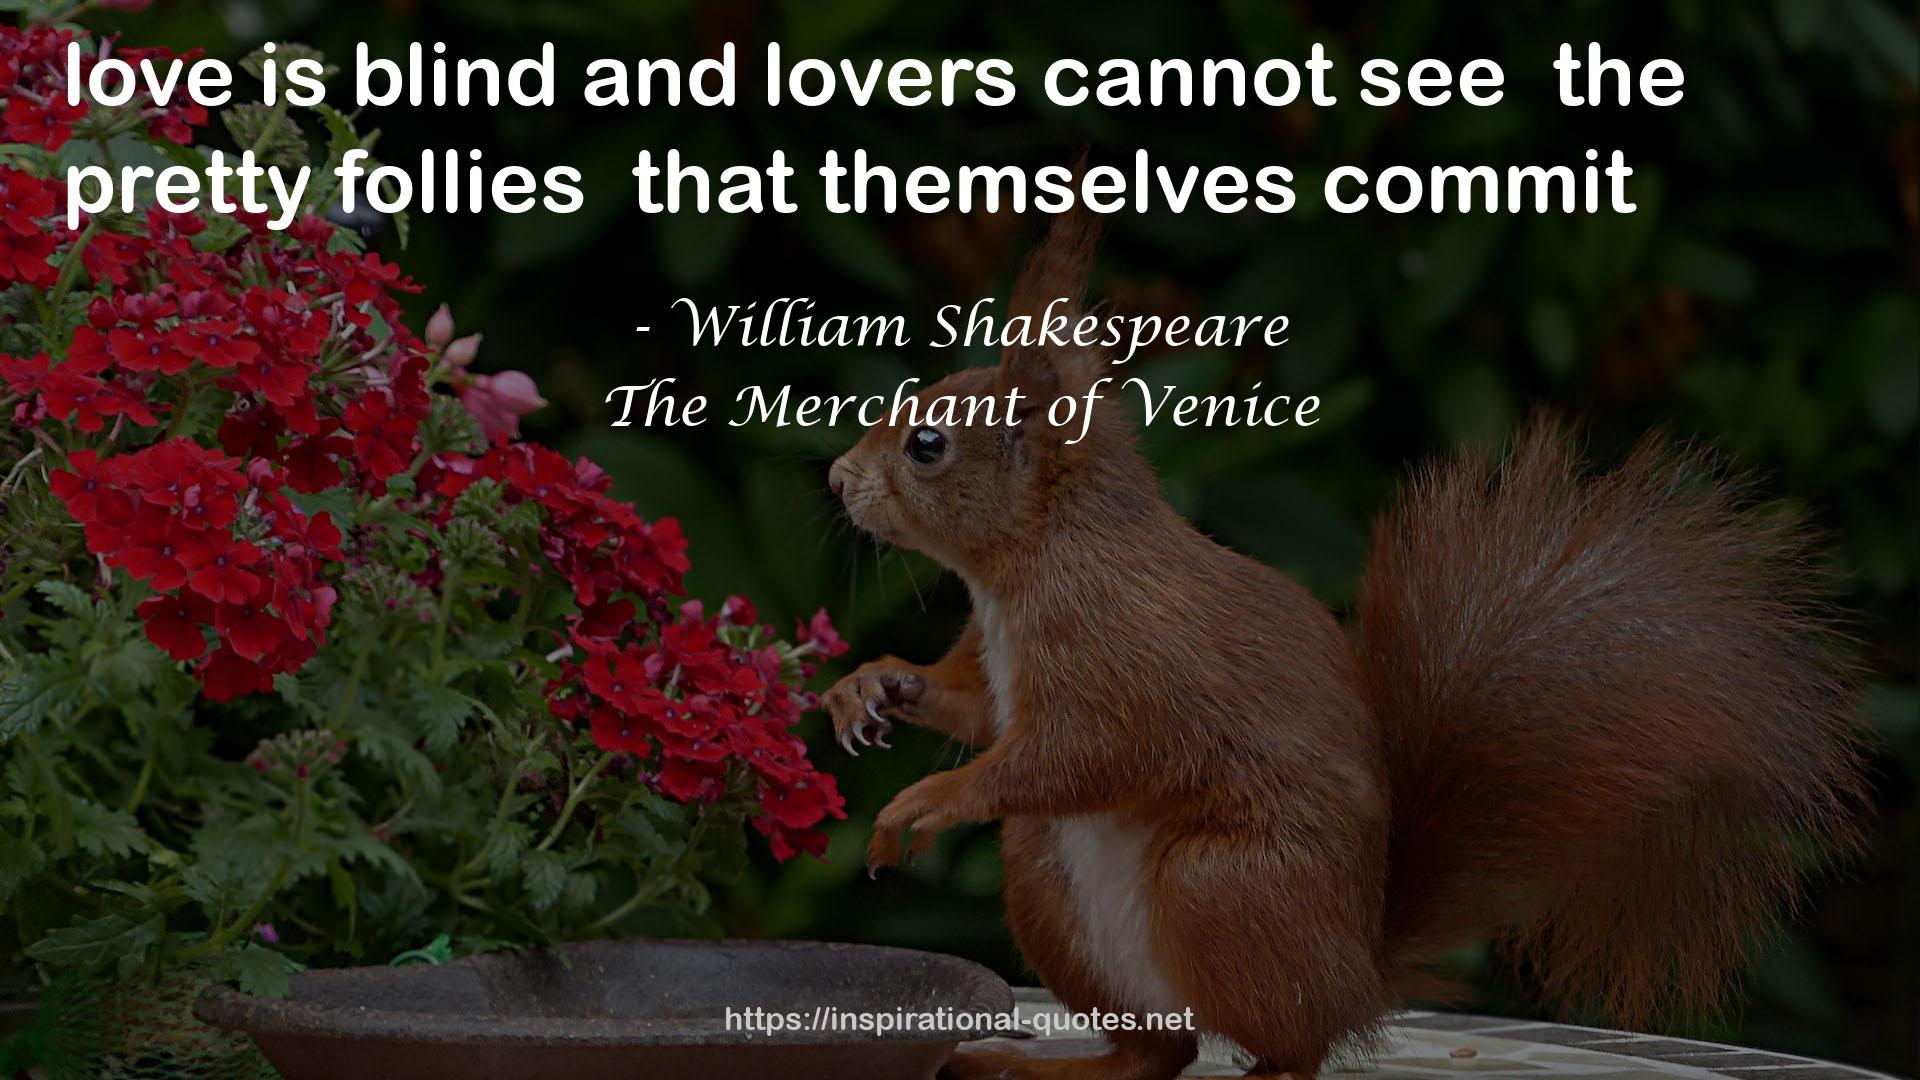 blindand lovers  QUOTES